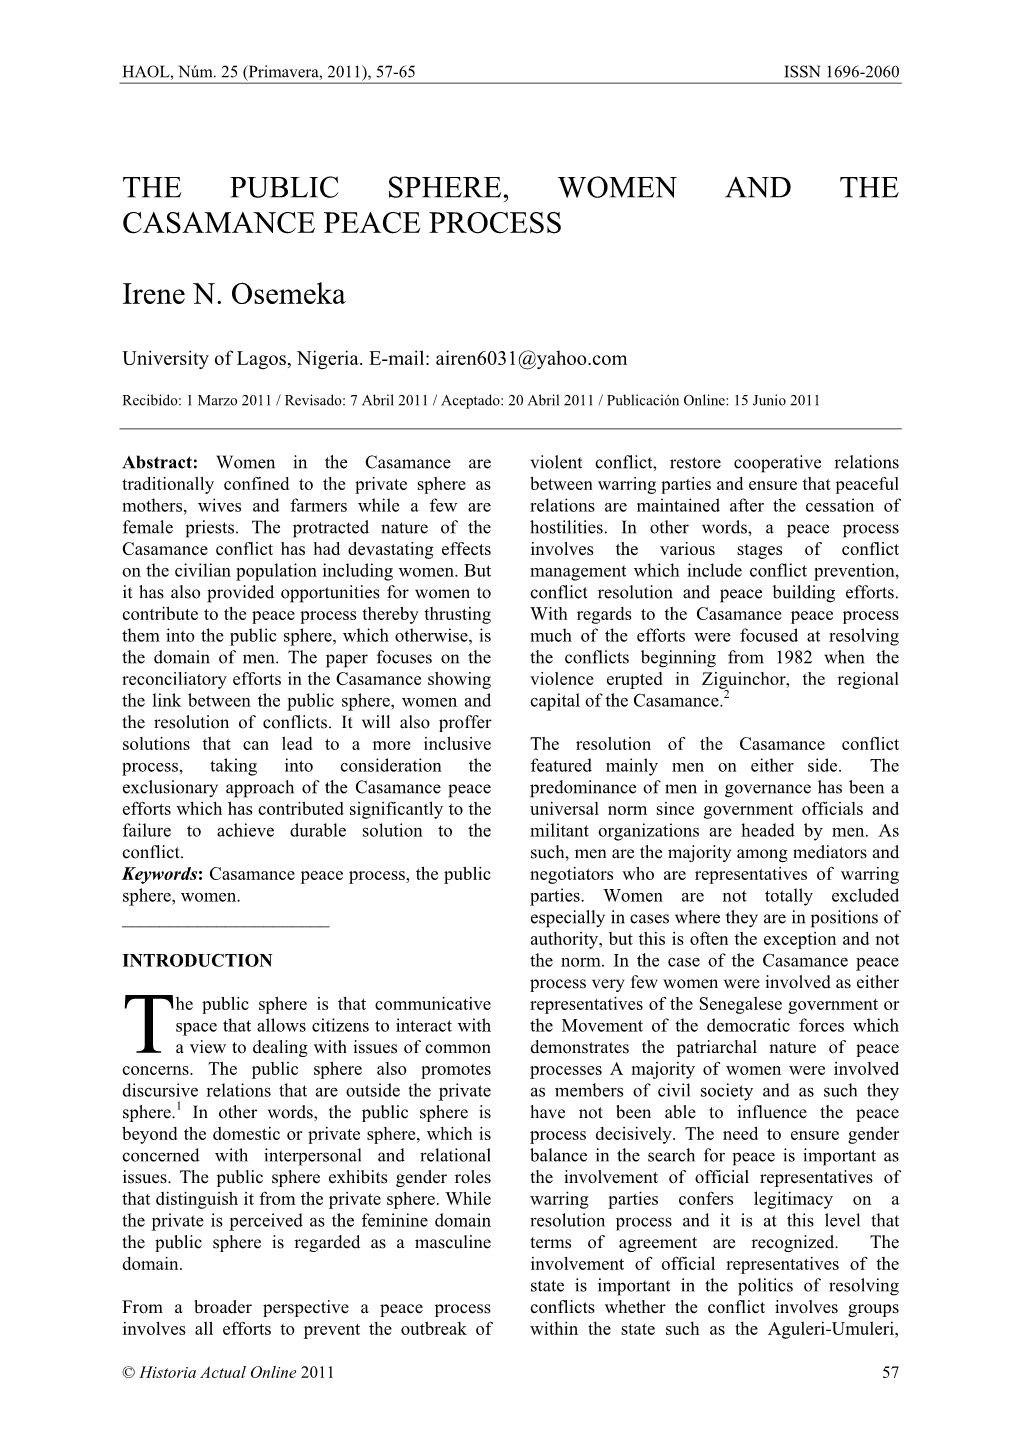 The Public Sphere, Women and the Casamance Peace Process